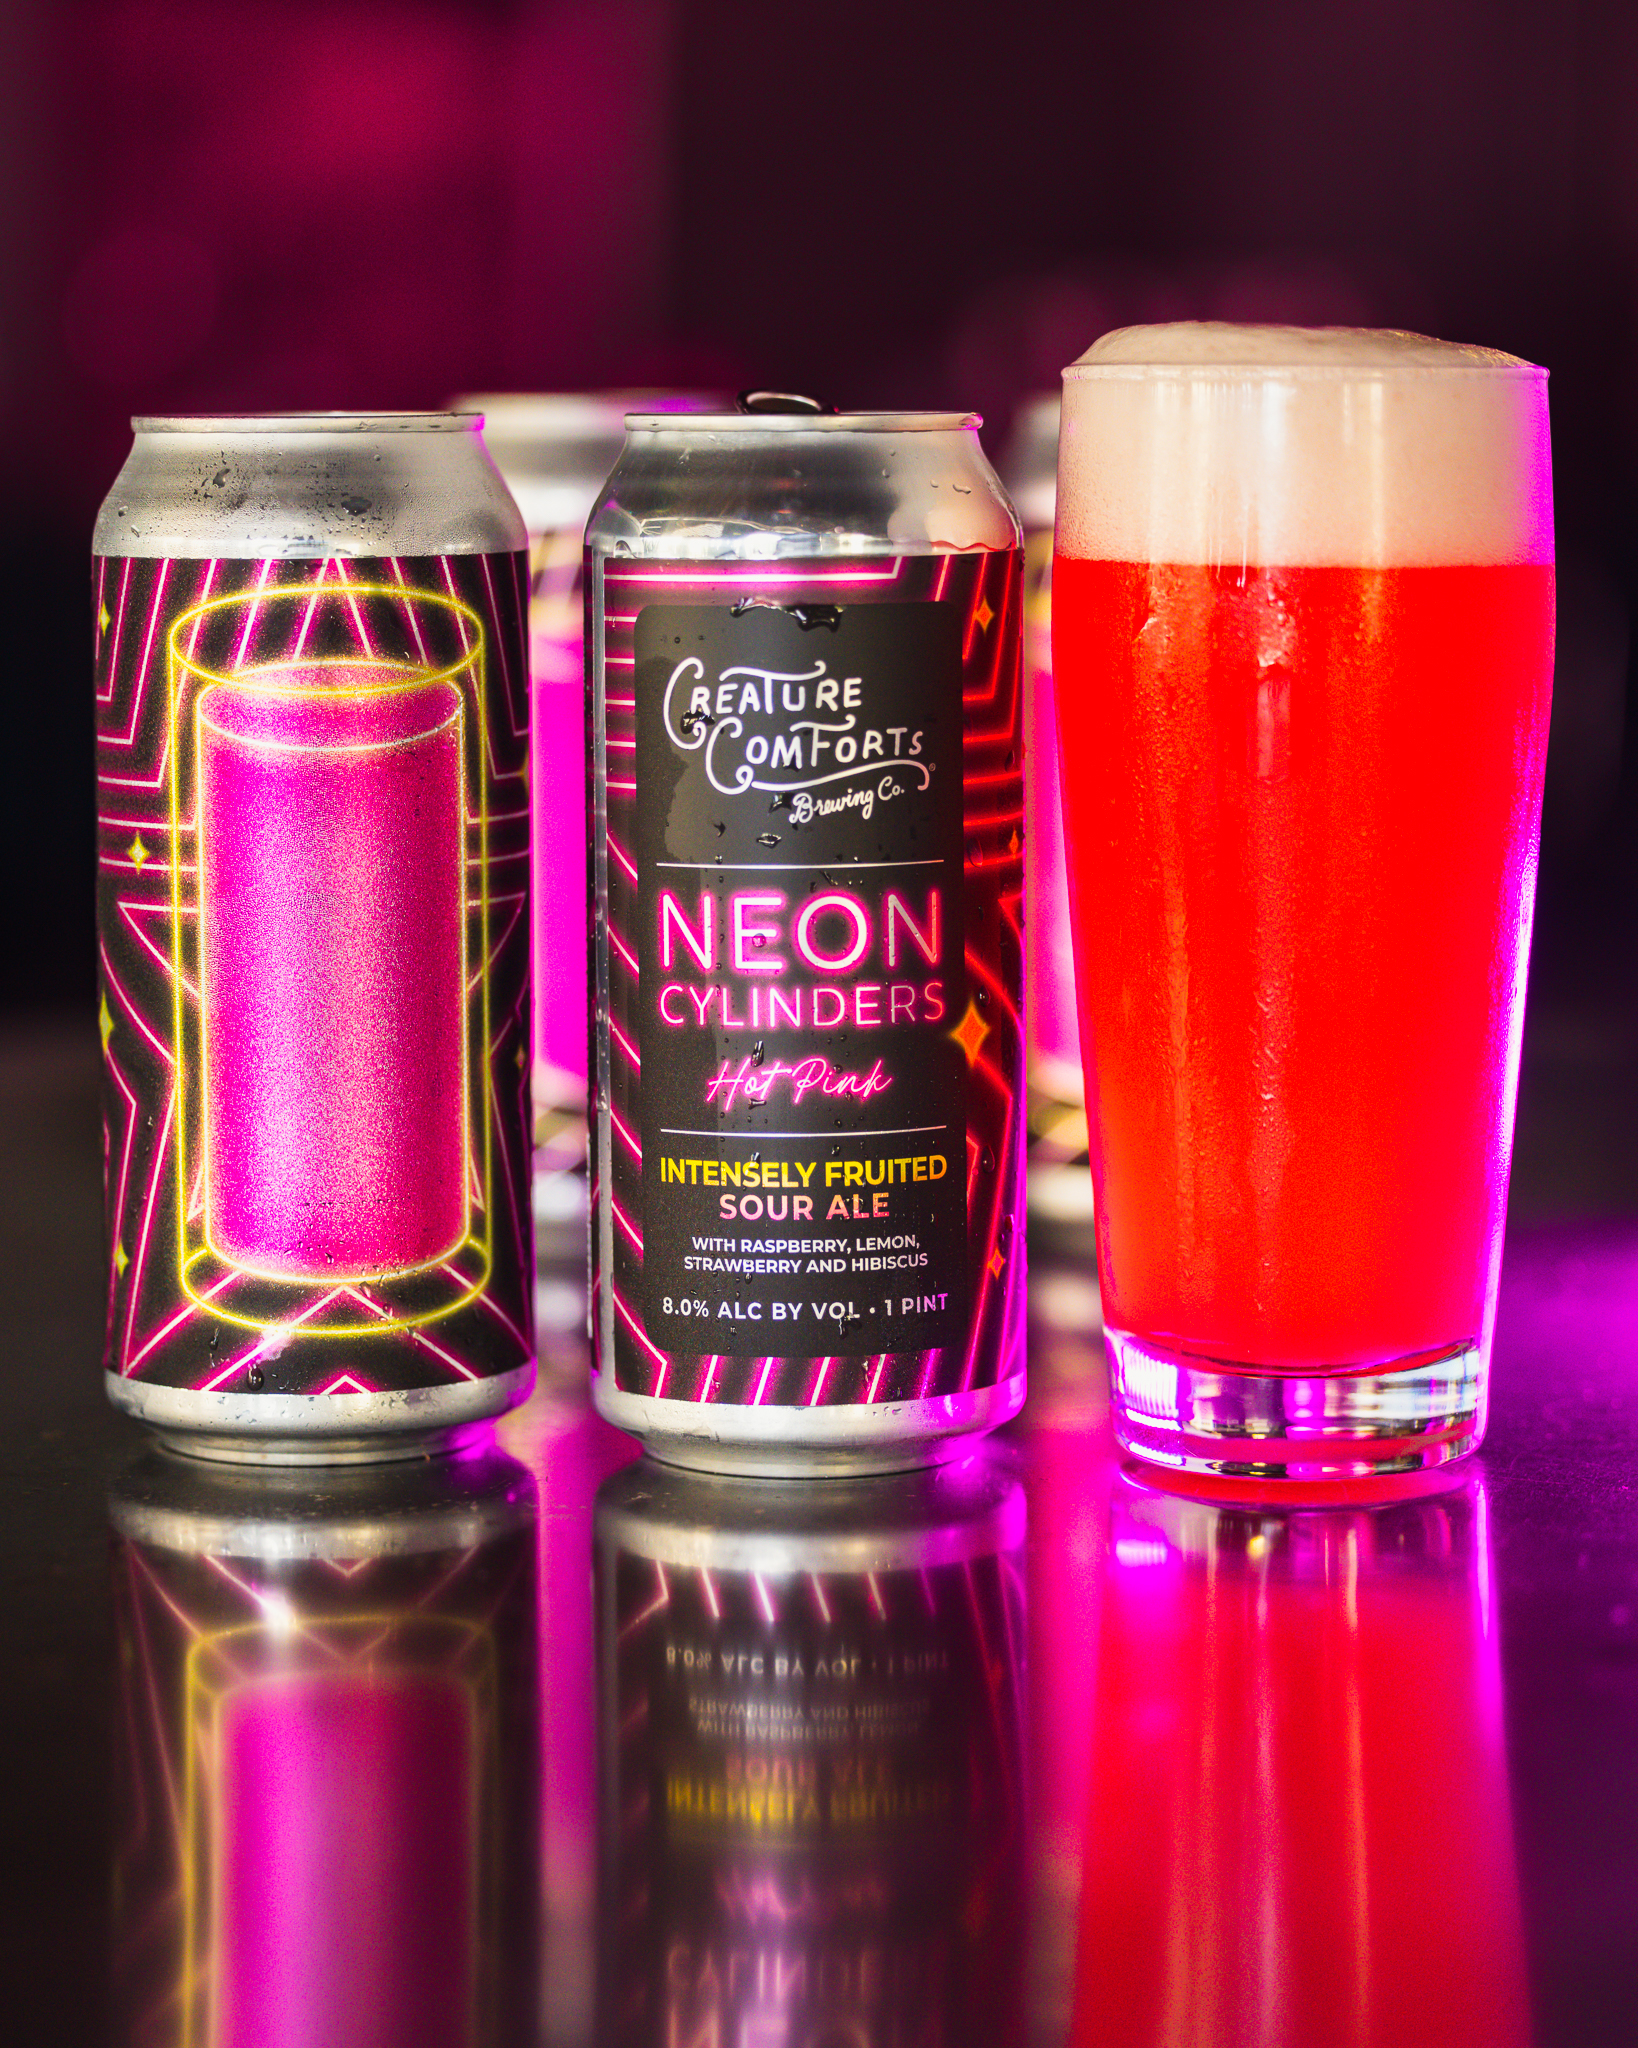 Neon Cylinders: Hot Pink